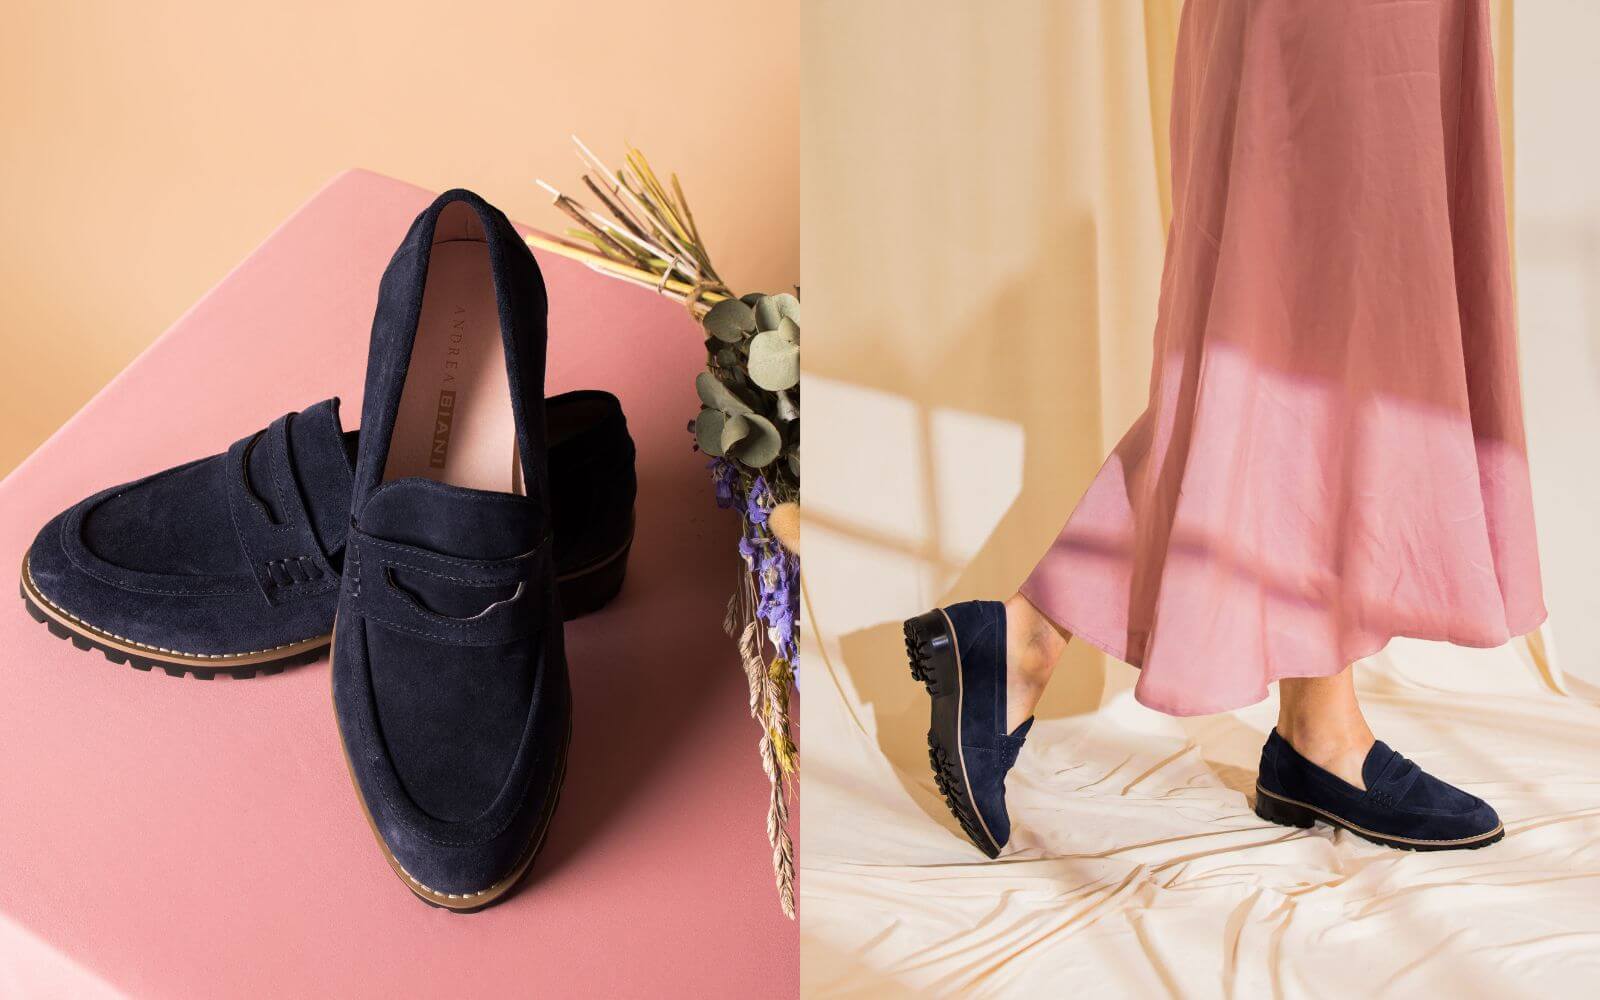 files/AB_Most_Loved-andrea-biani-dandy-loafer-navy-suede.jpg